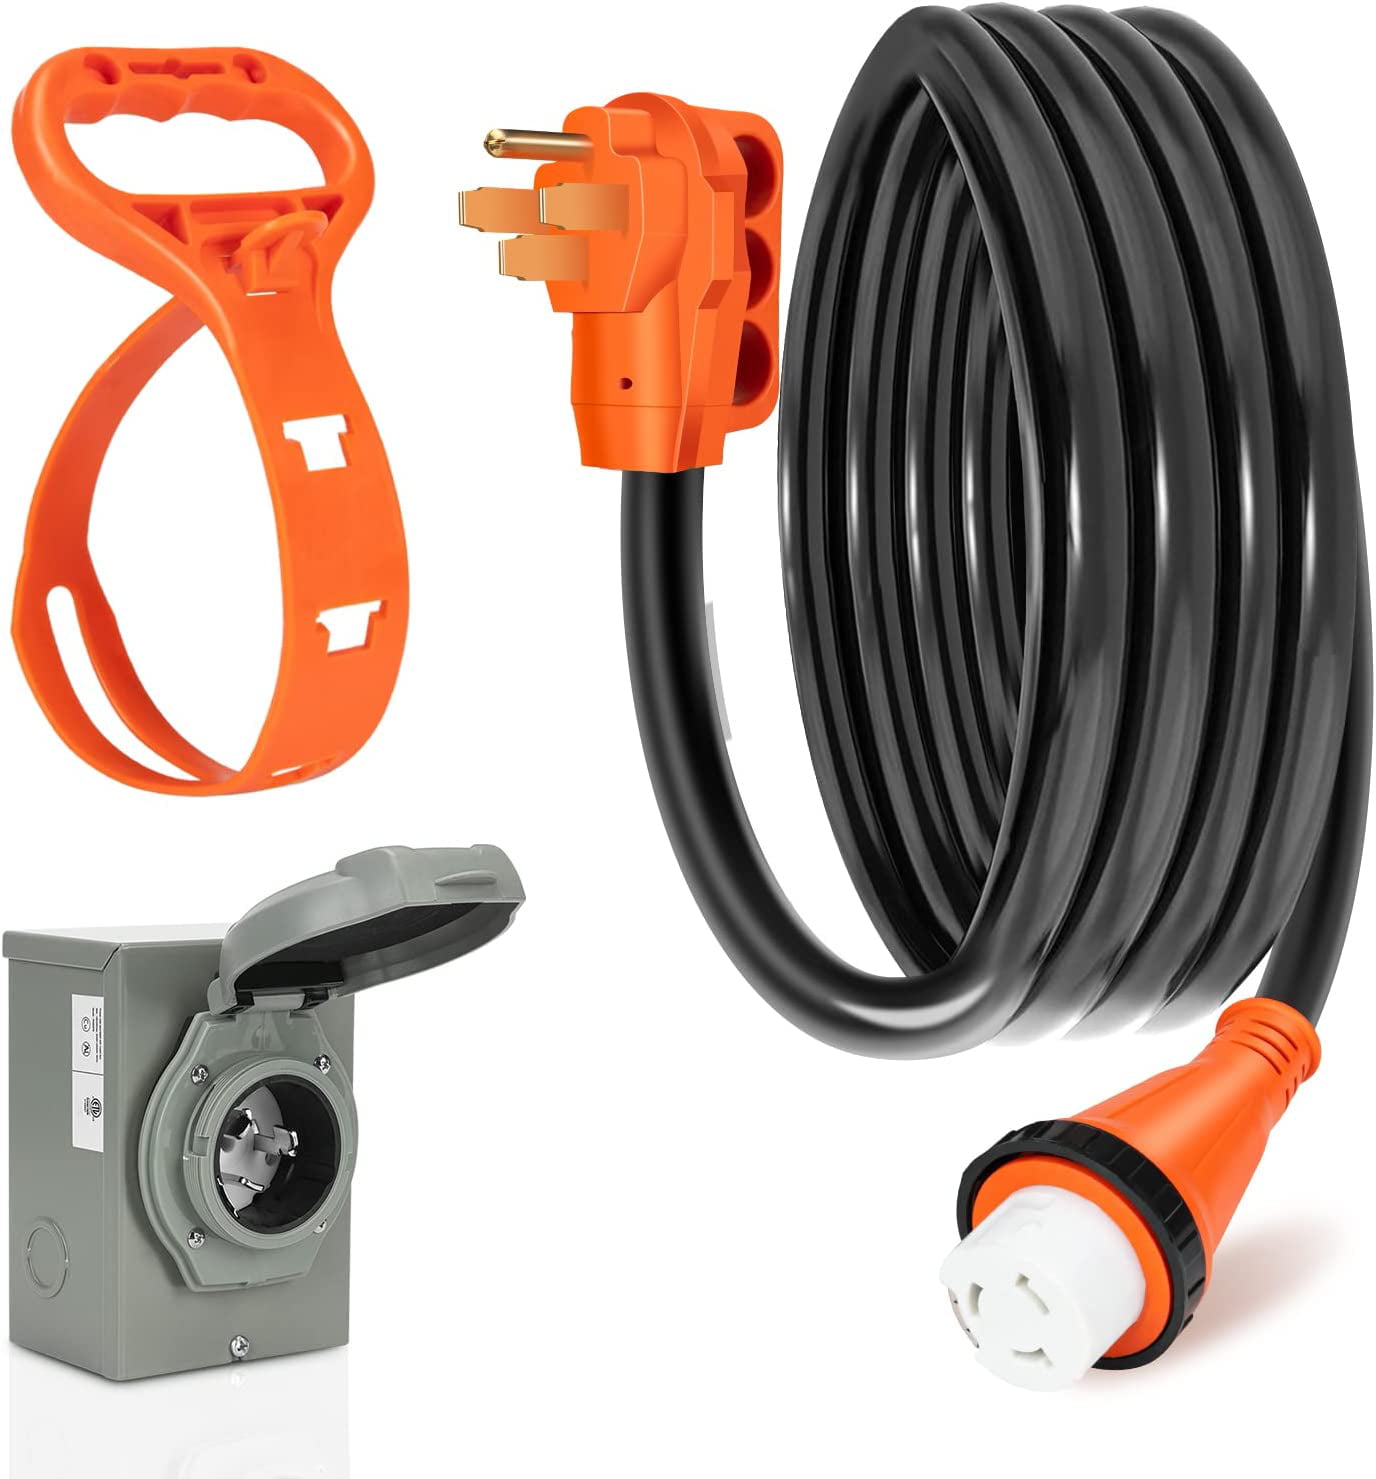 ETL Listed RVGUARD 30 Amp Generator Power Inlet Box and Power Cord Waterproof Combo Kit NEMA TT-30P to L5-30R Extension Cord 25 Feet with NEMA L5-30P Generator Inlet 